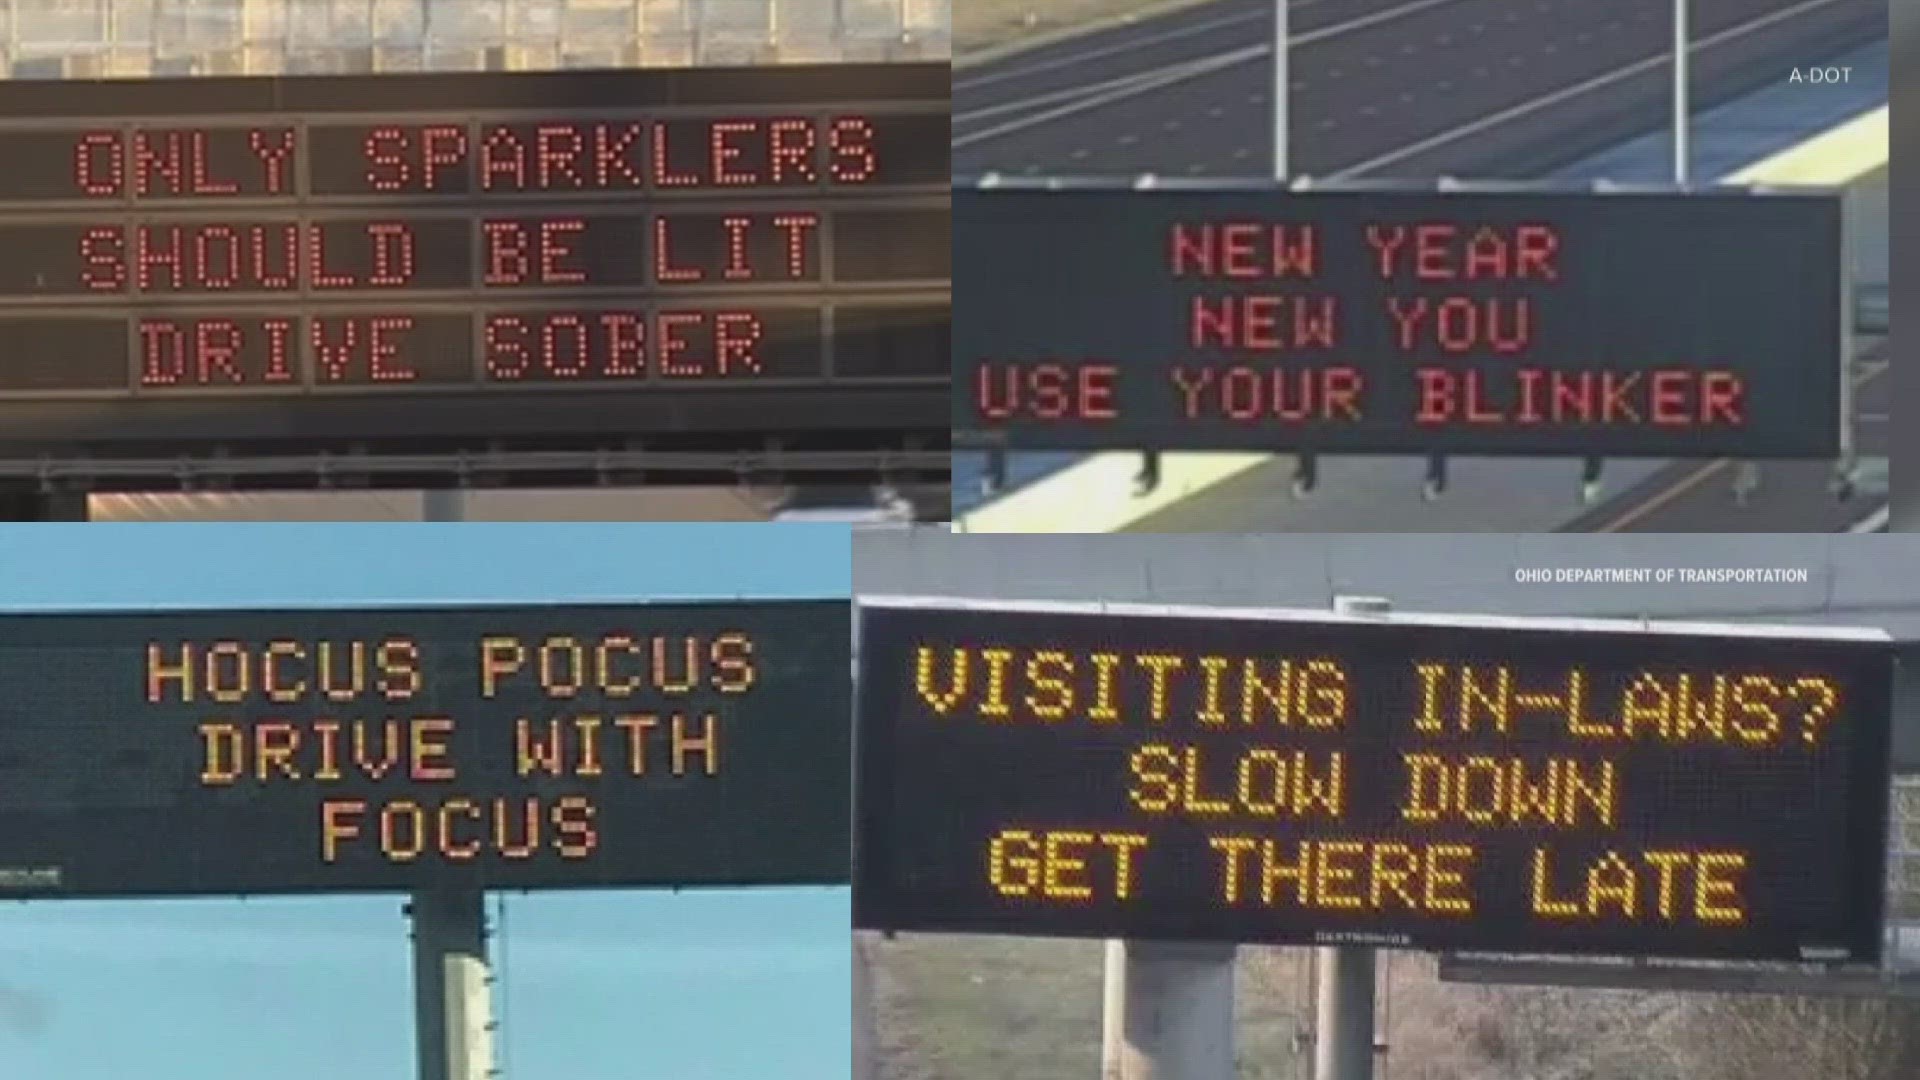 We've all seen them, maybe laughed a bit, and kept driving but those clever messages we sometimes see on digital highway signs across the country are going away.